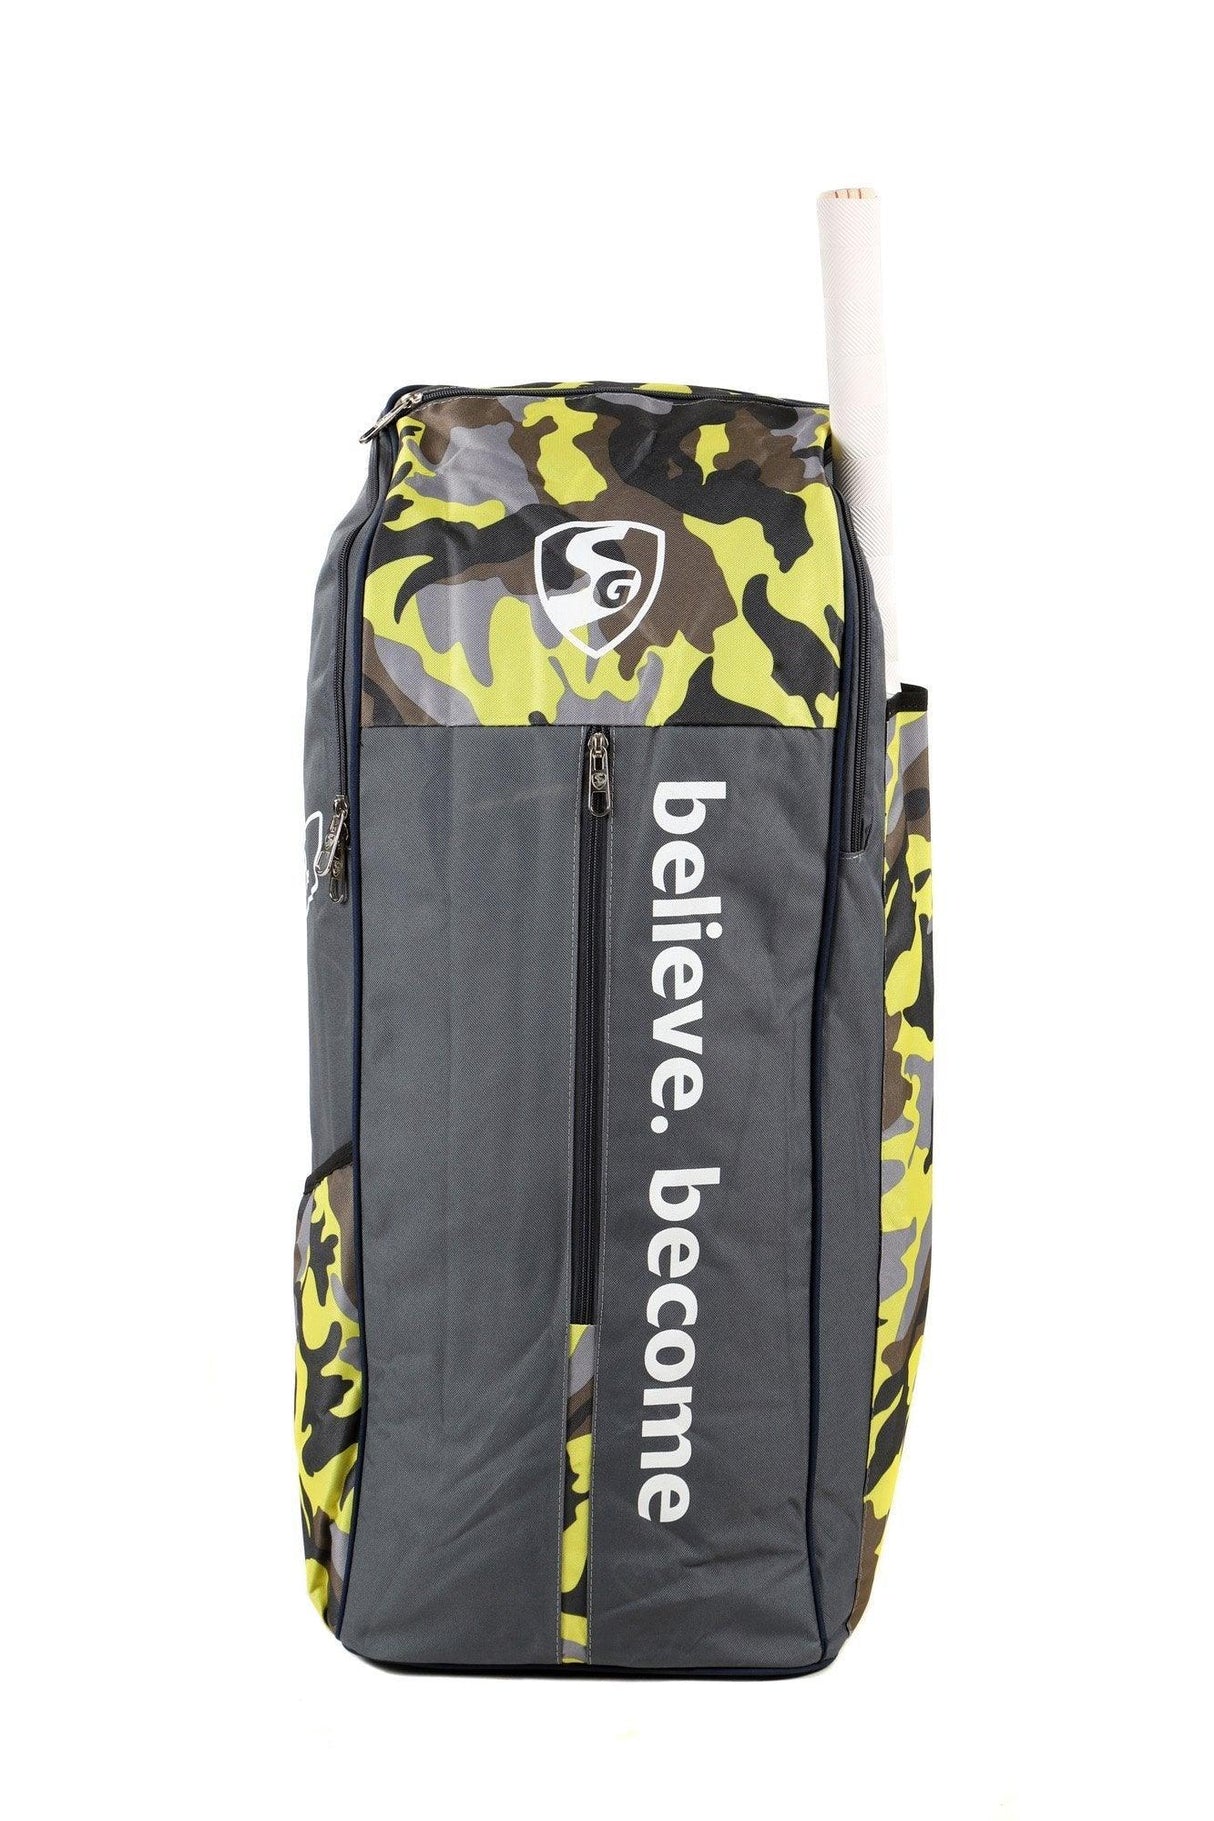 SG Savage ® X2 Kit Bag with Shoe Compartment Multi Color Without Wheel Mill Sports 